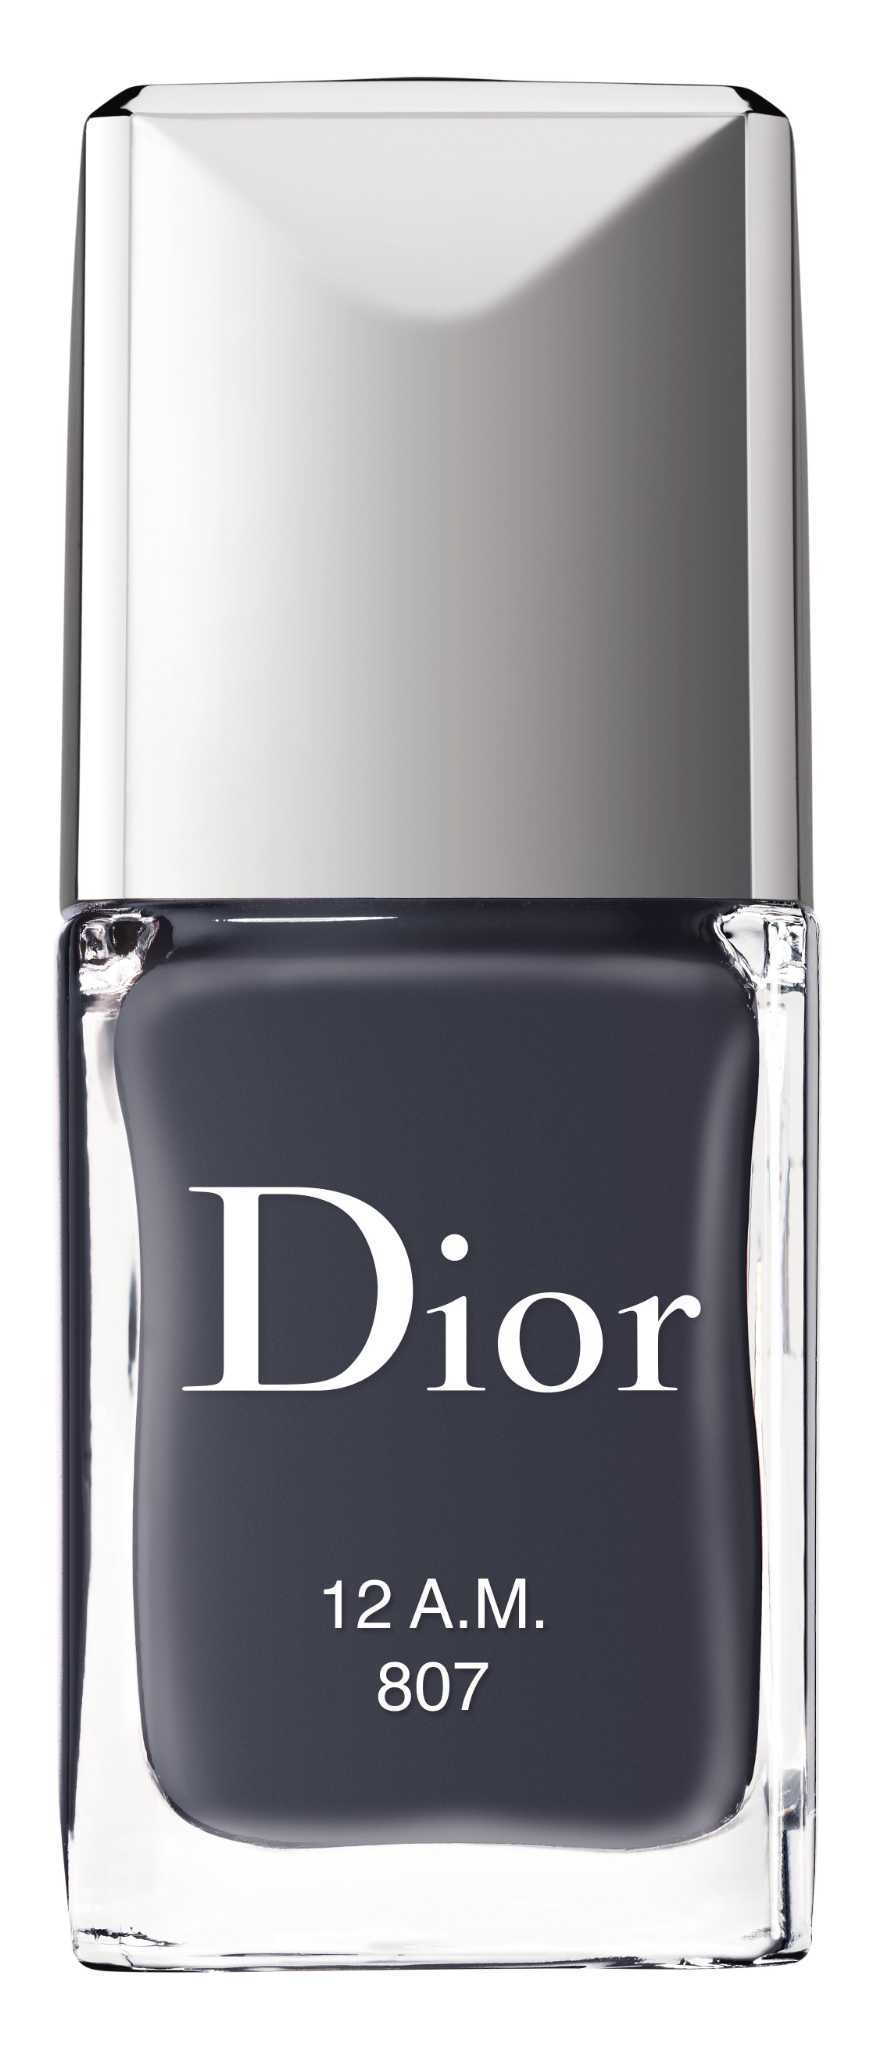 The Seasons Hottest Nail Colors Offer Bold Statements Dark